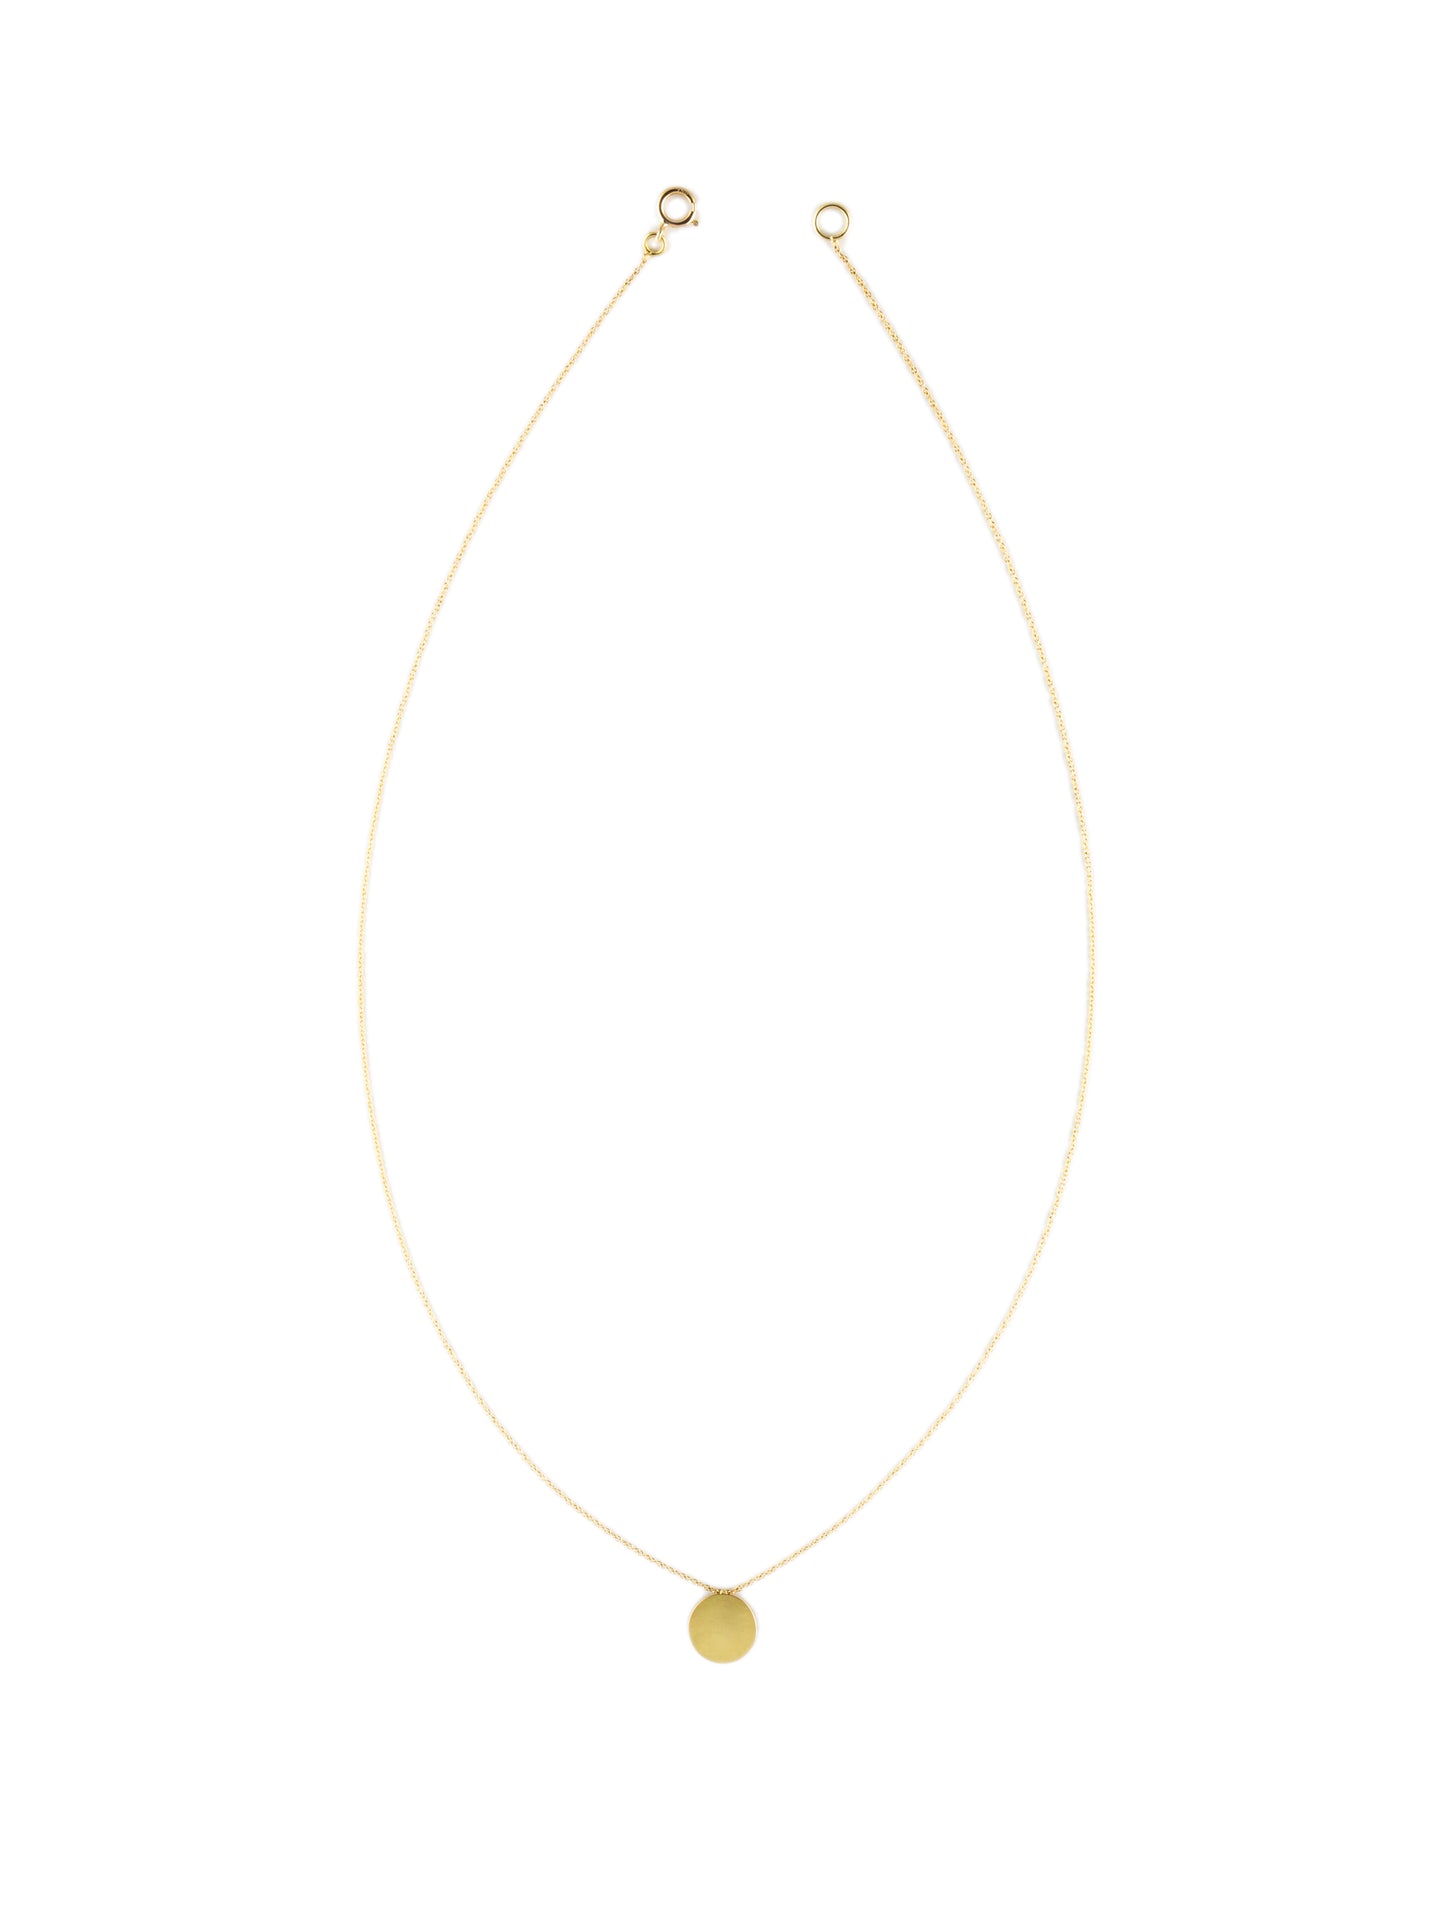 OVAL NECKLACE & GOLD CHAIN